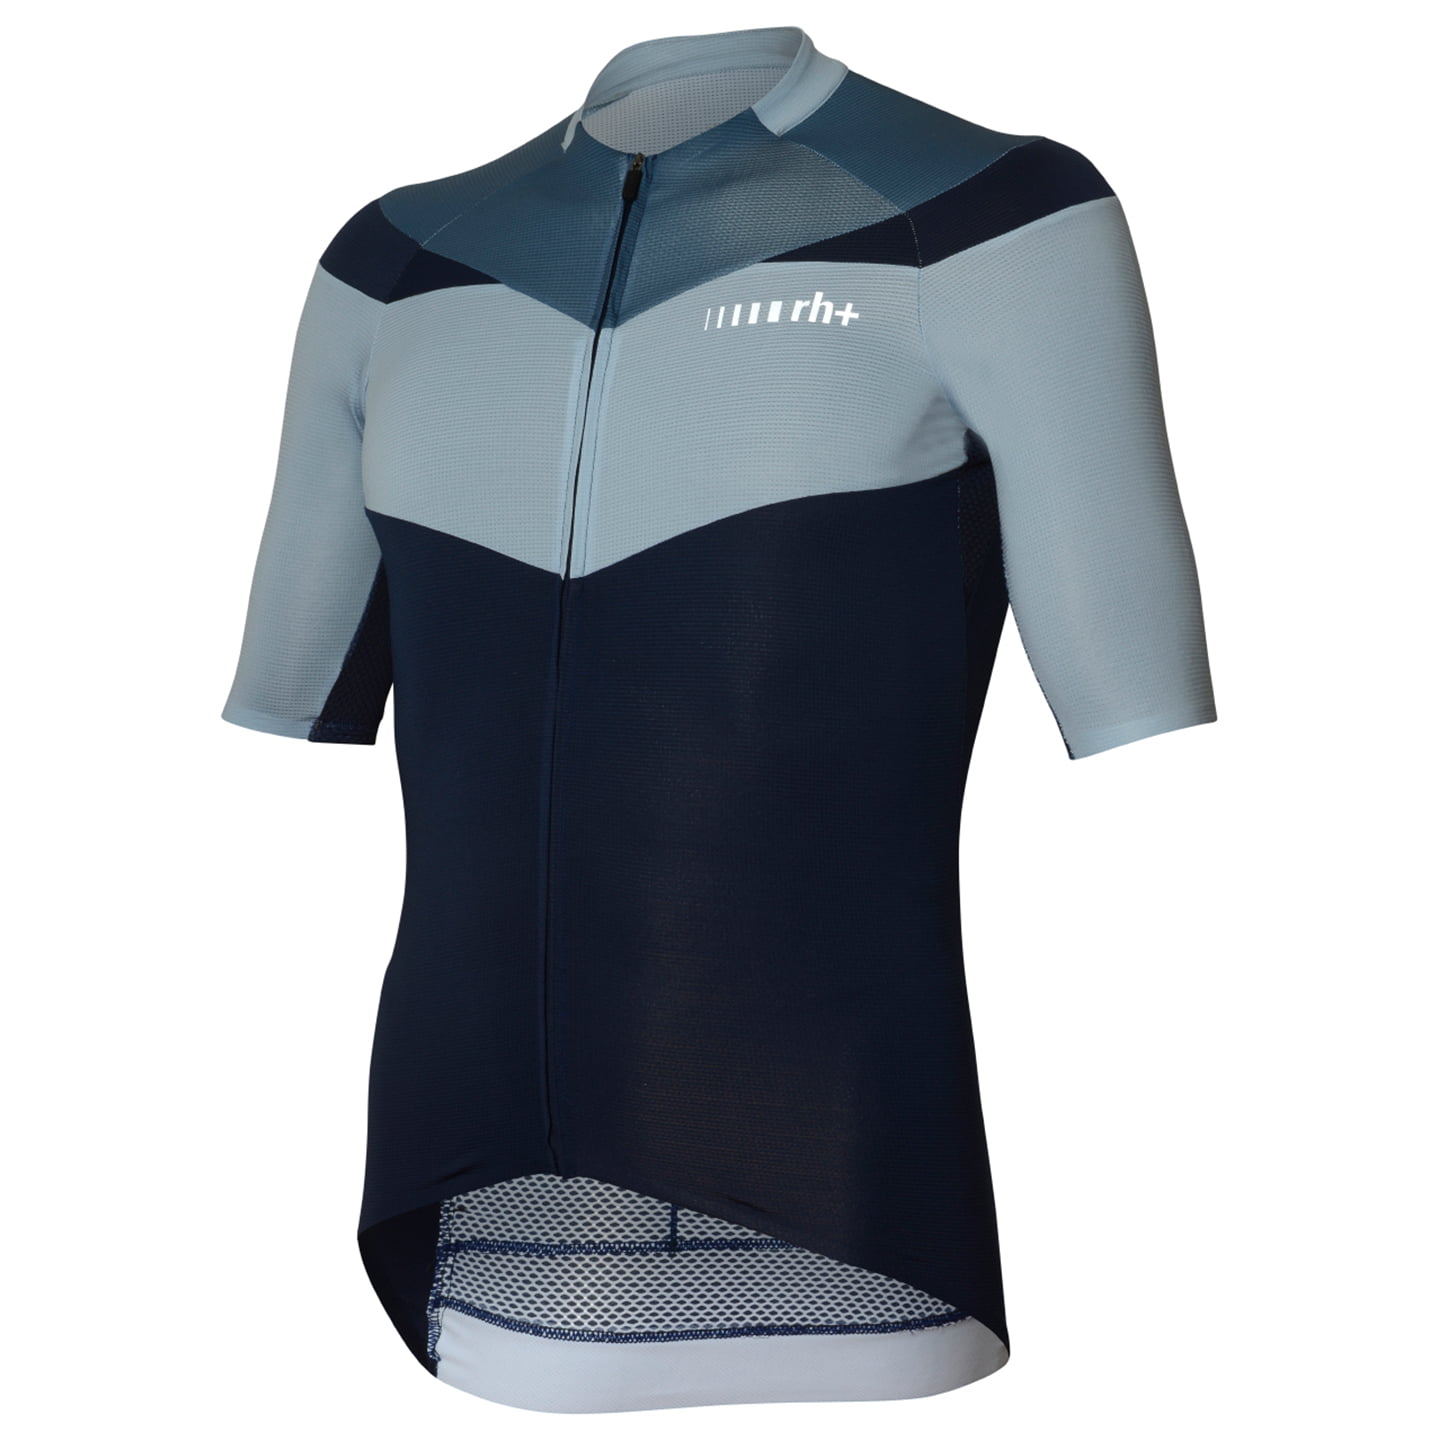 RH+ Team Short Sleeve Jersey Short Sleeve Jersey, for men, size XL, Cycling jersey, Cycle clothing